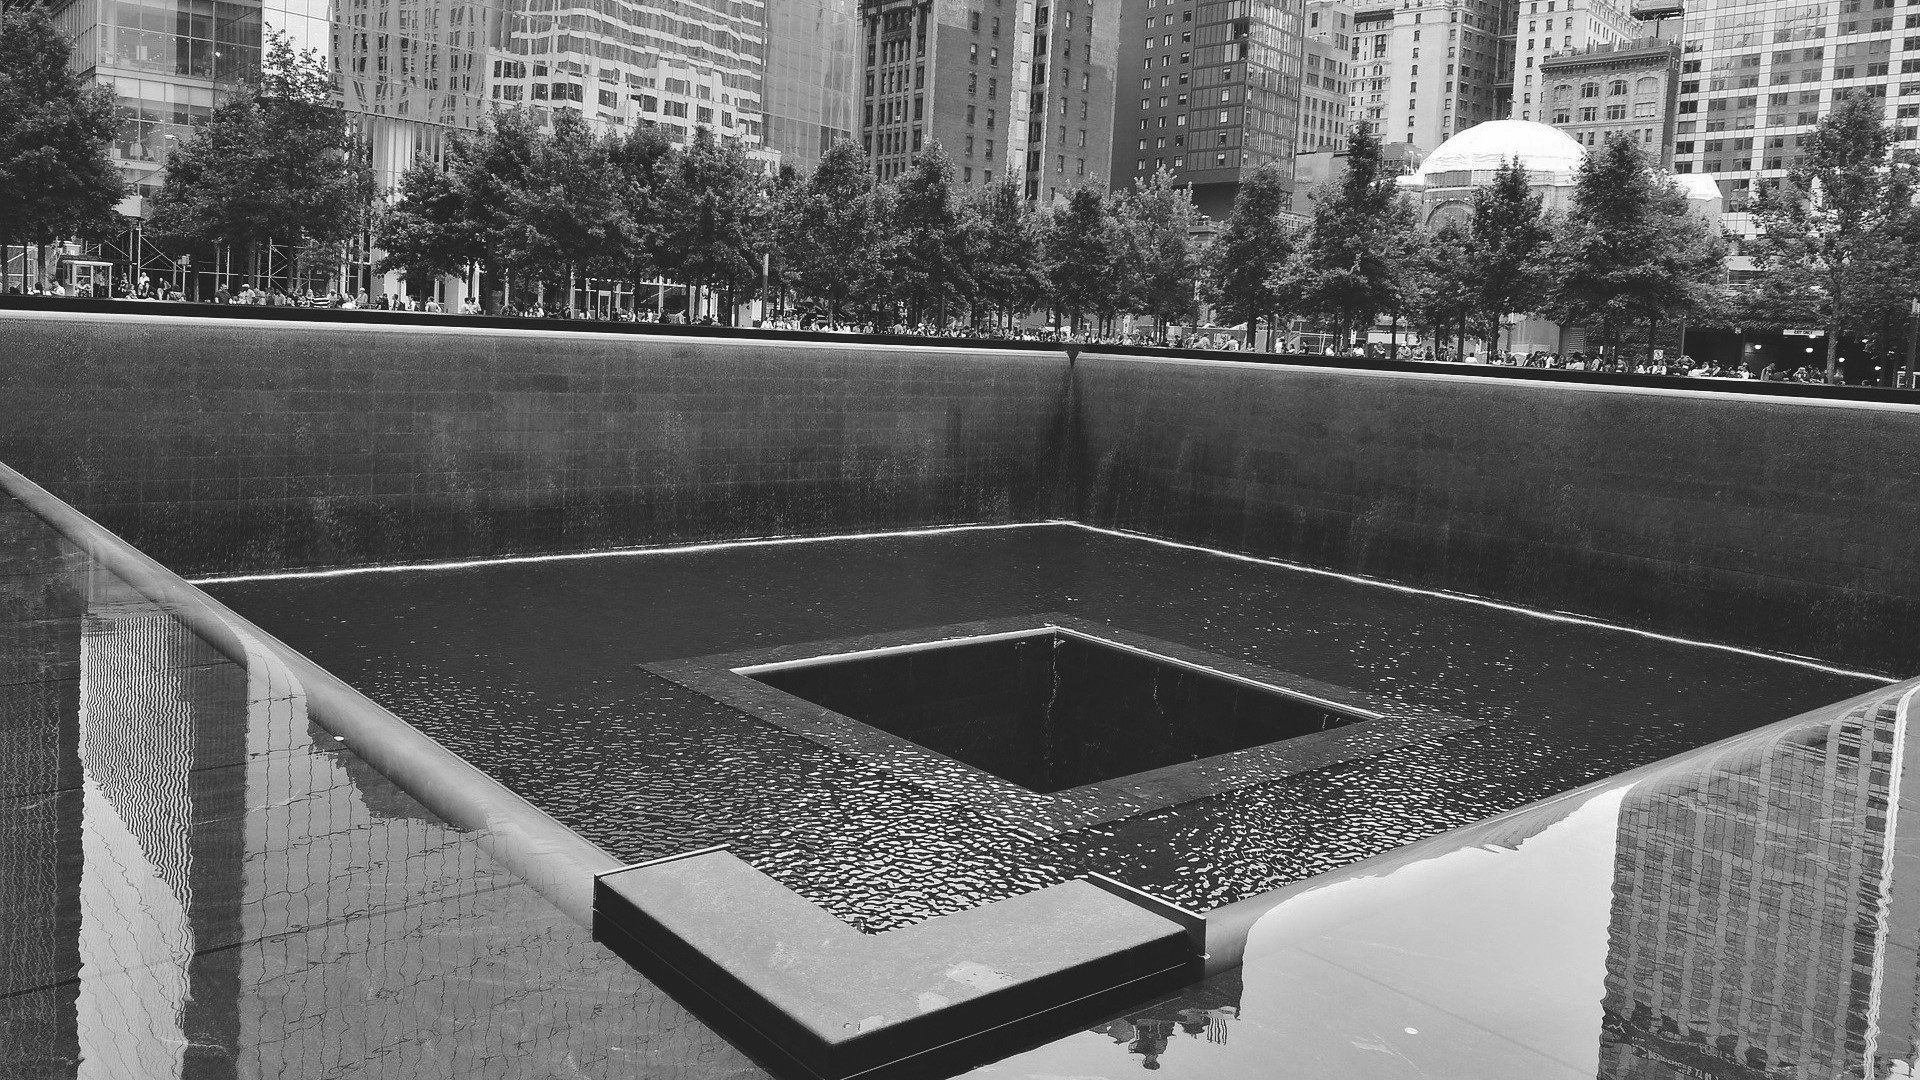 The tragic events of 9/11 had a profound impact that would have been difficult to comprehend. 20 years later, what have we learned?